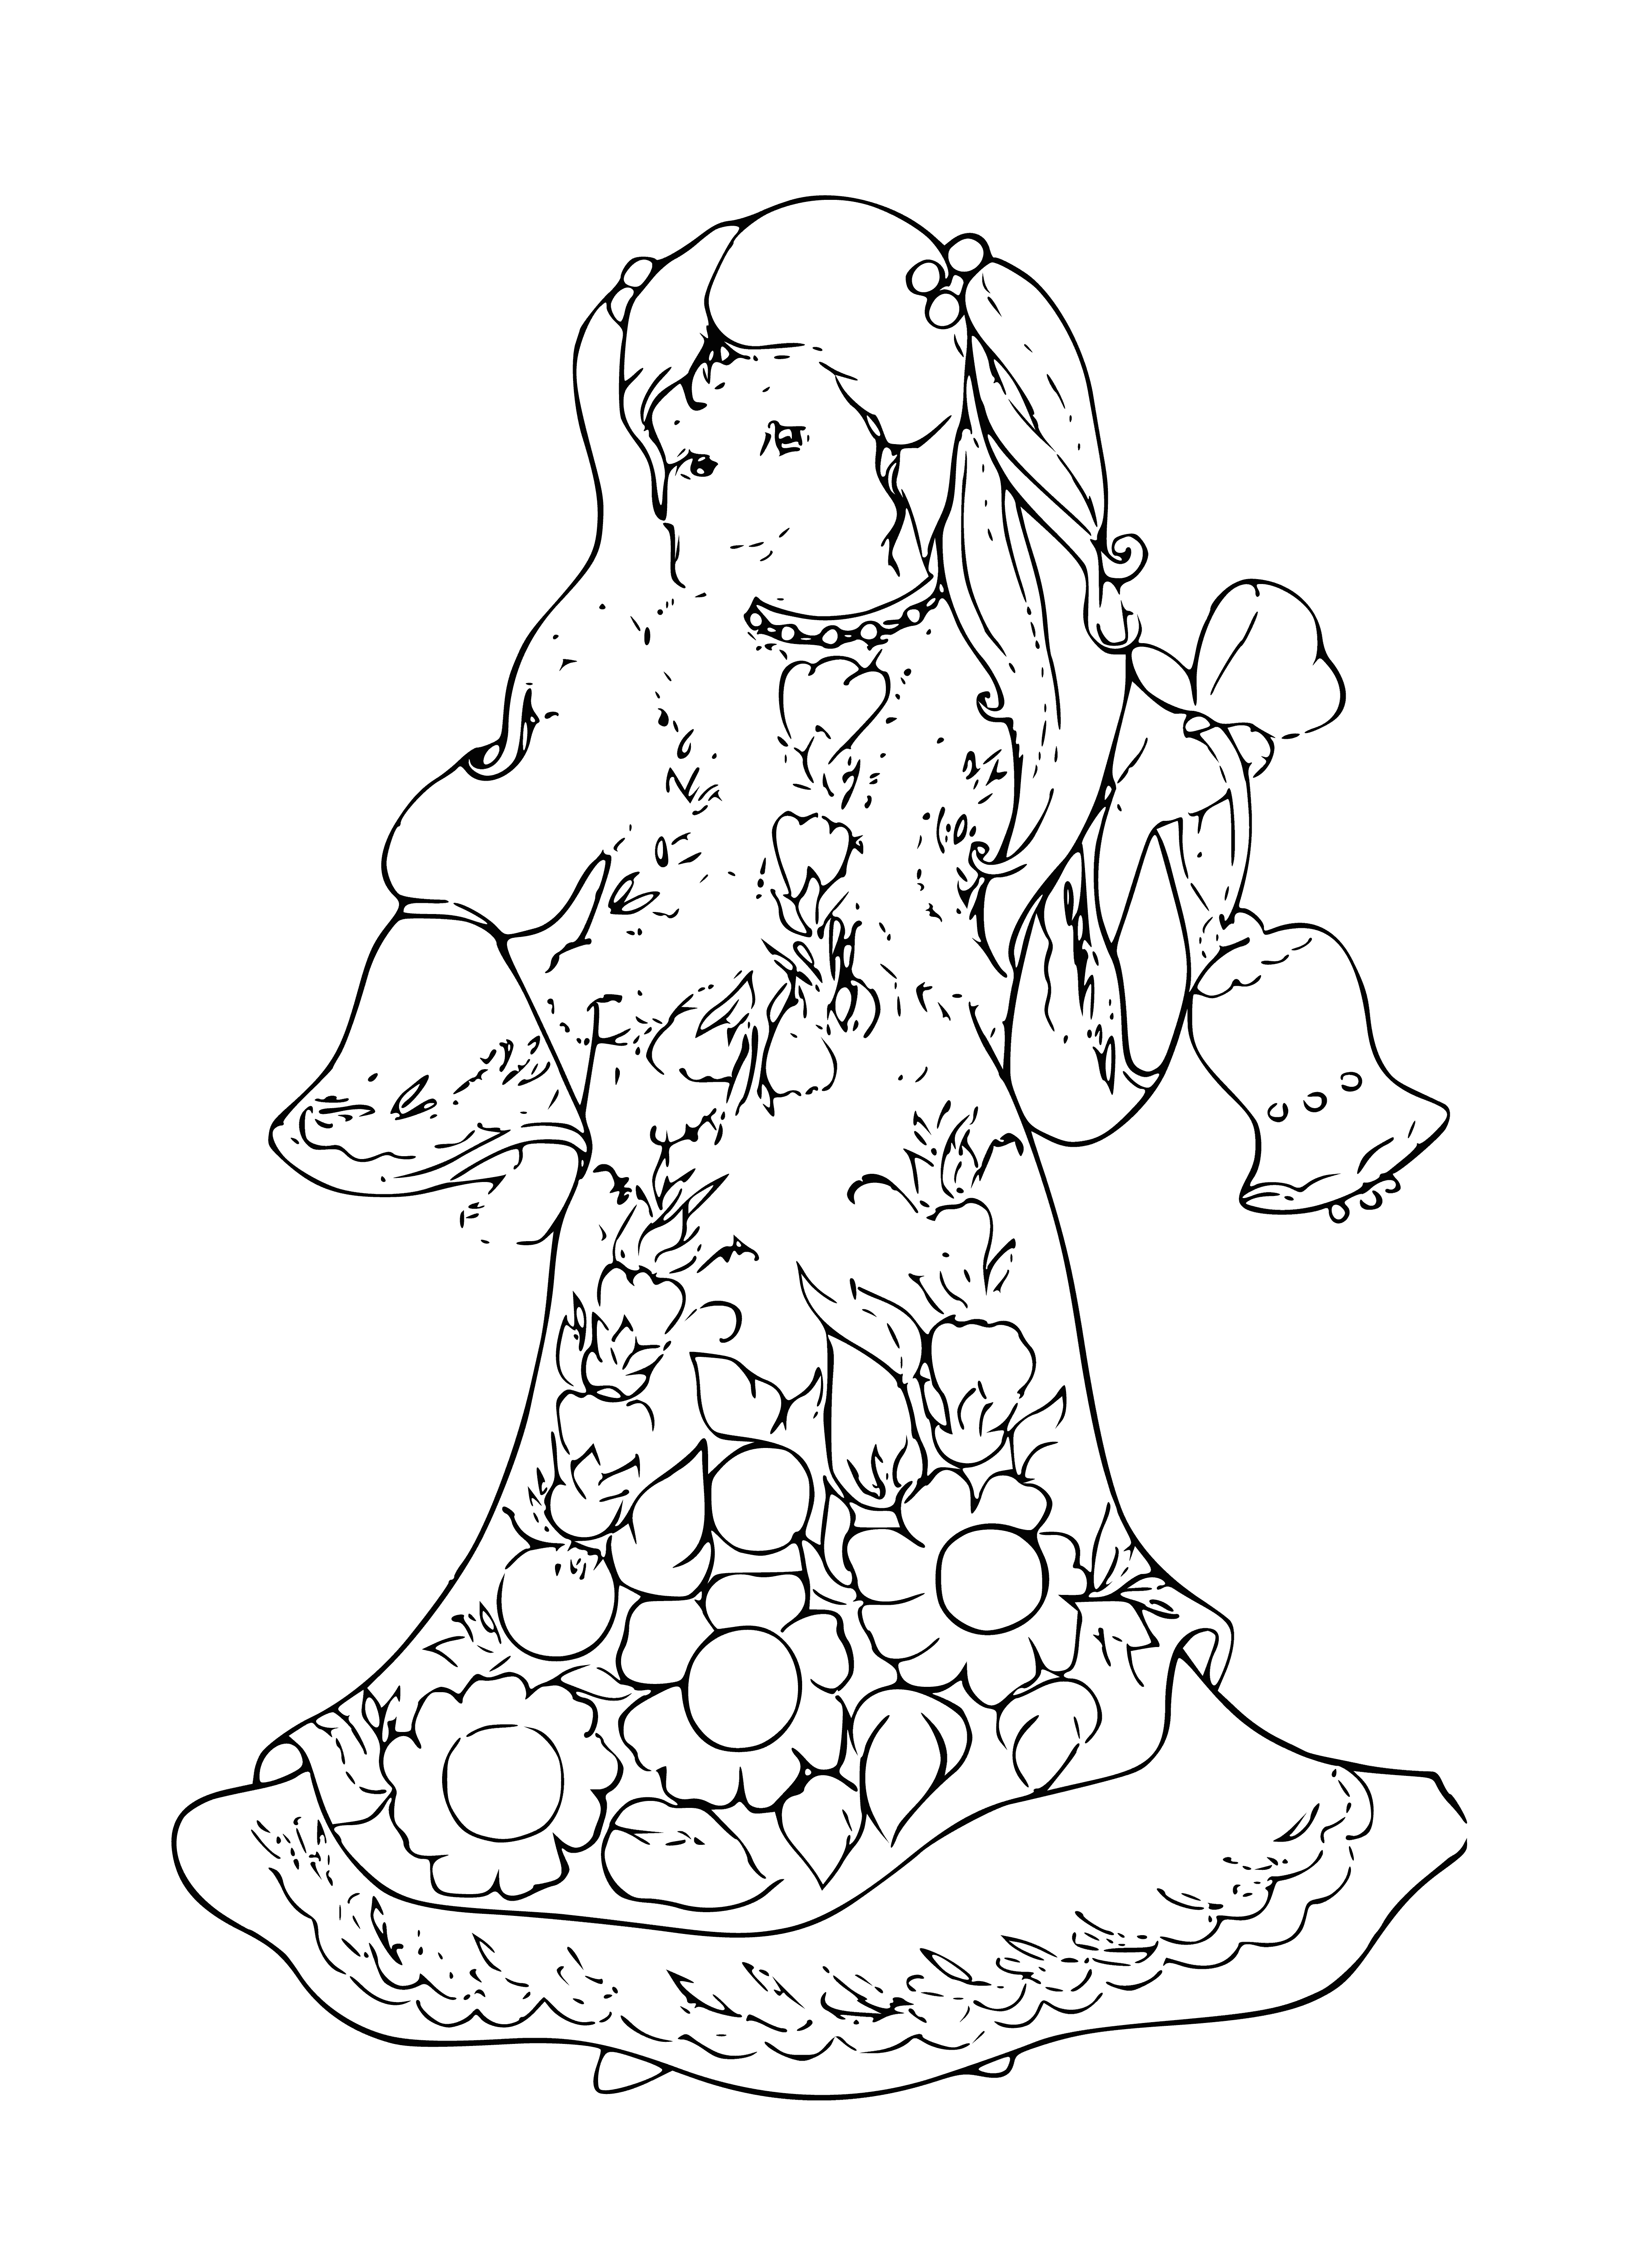 Outfits with patterns coloring page